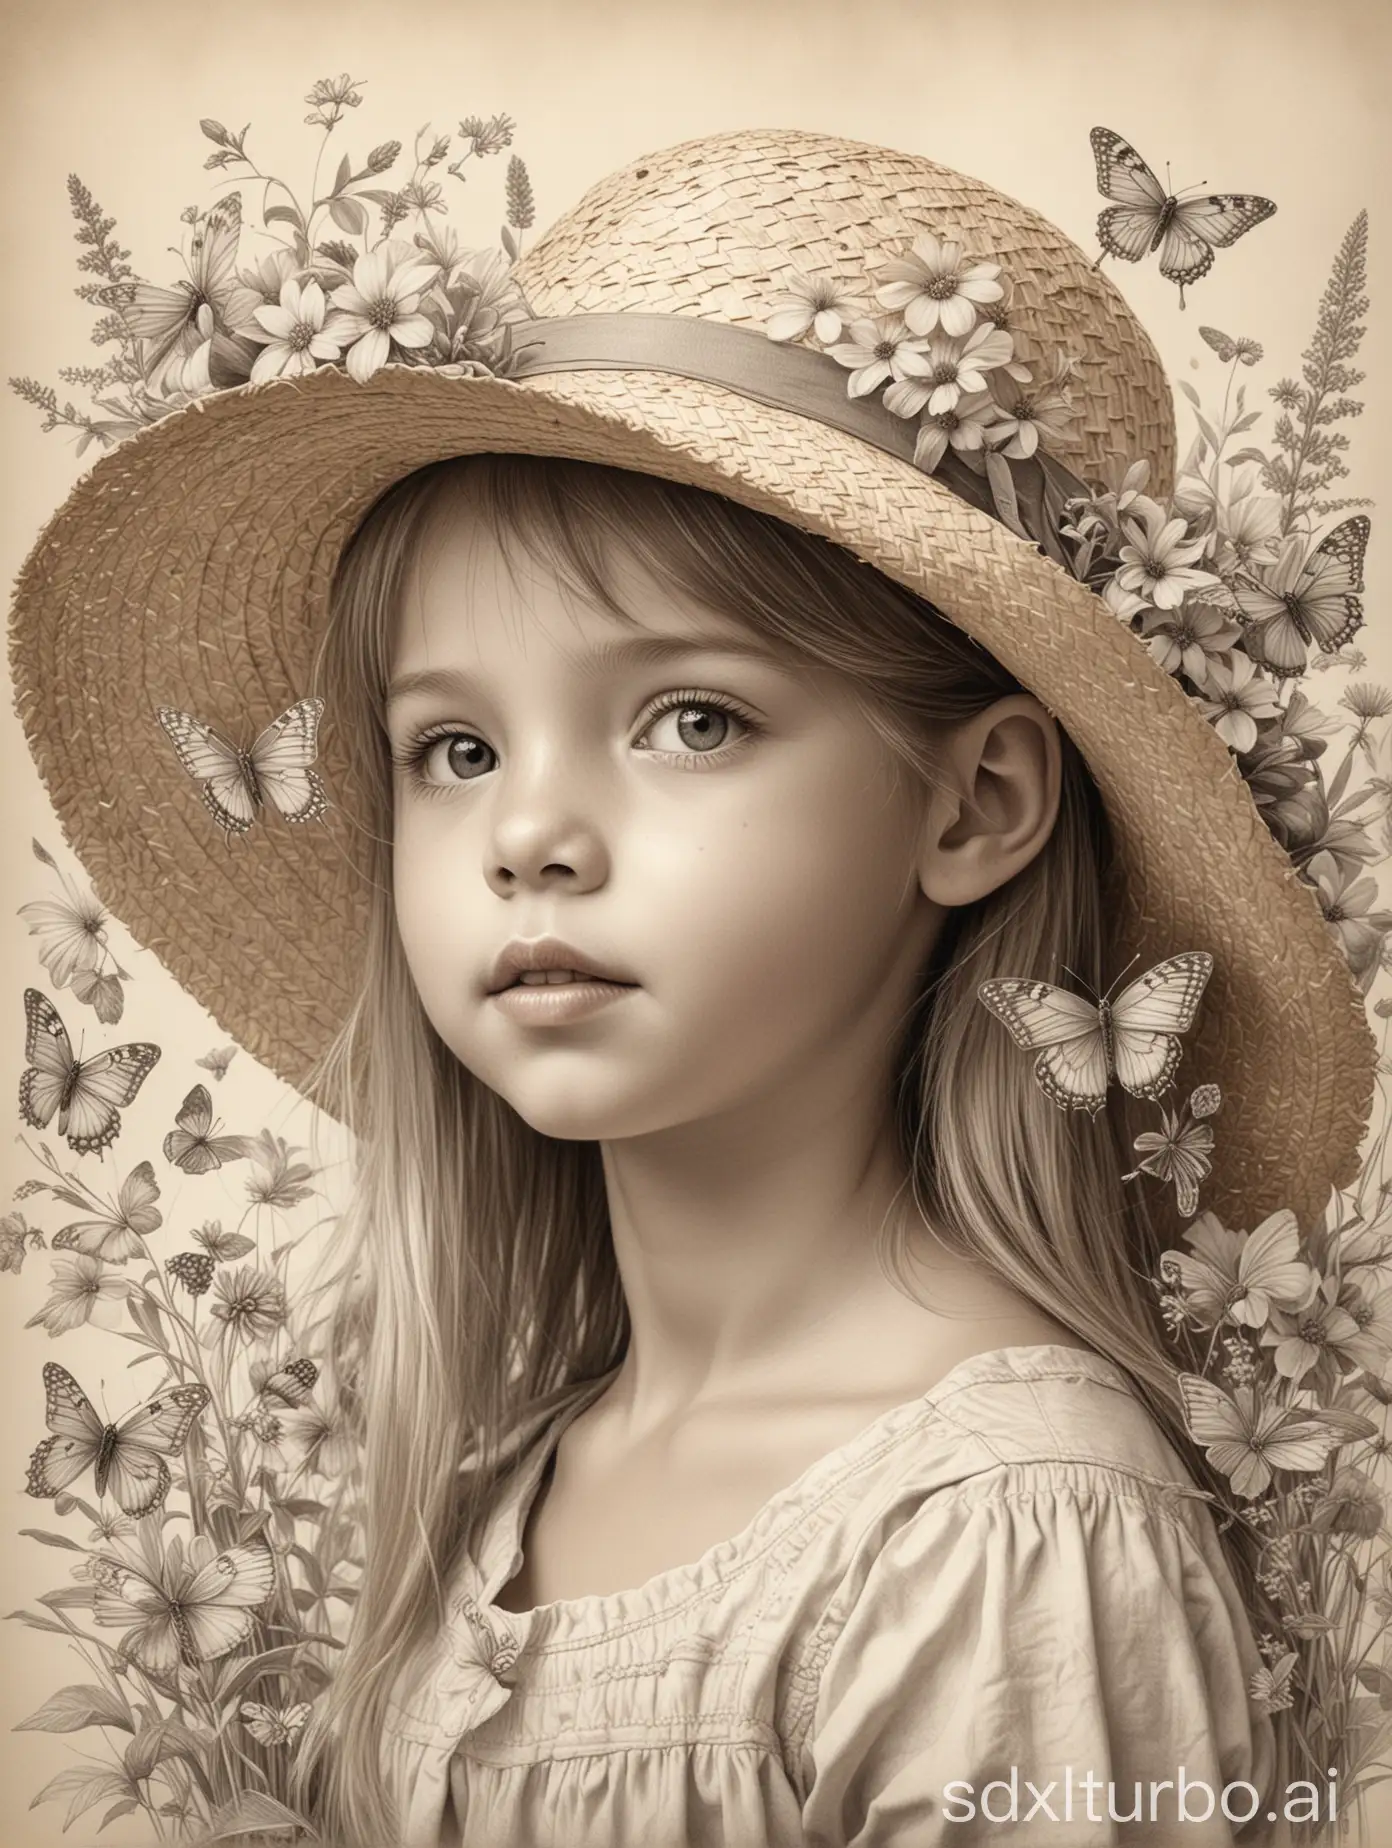 Dreamy-Portrait-of-a-Little-Girl-with-Straw-Hat-Flowers-and-Butterflies